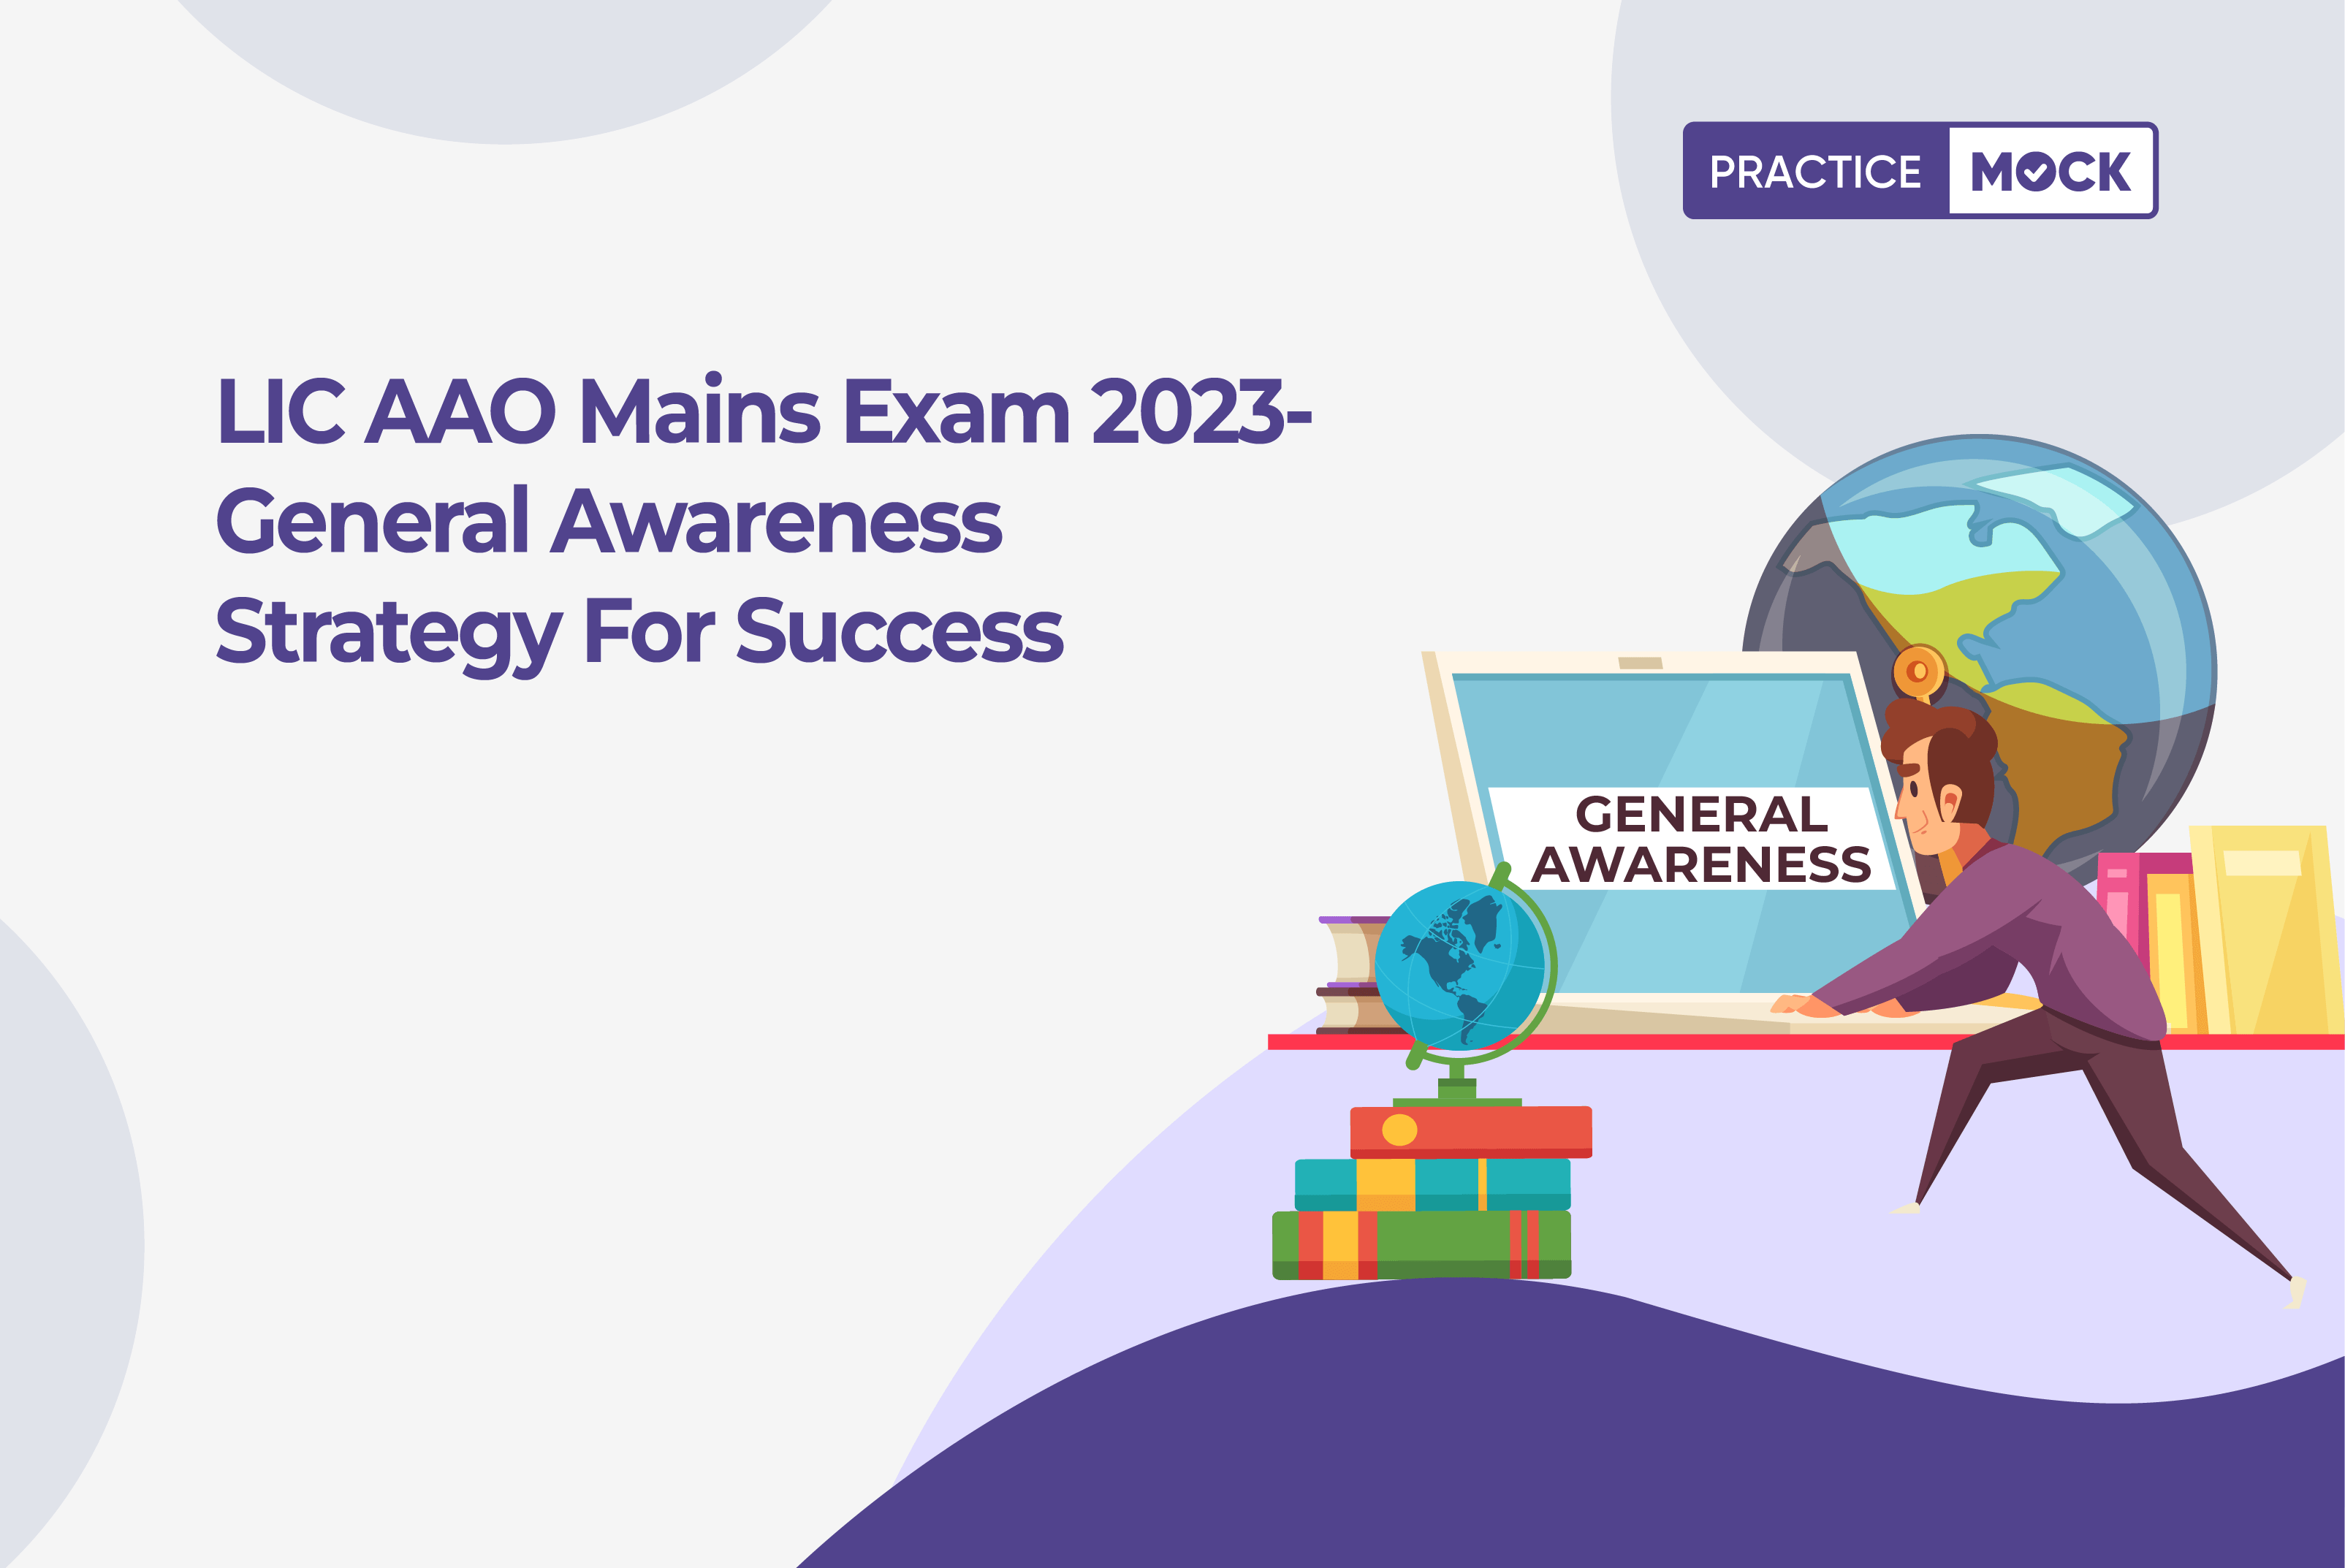 LIC AAO Mains Exam 2023-General Awareness Strategy for Success